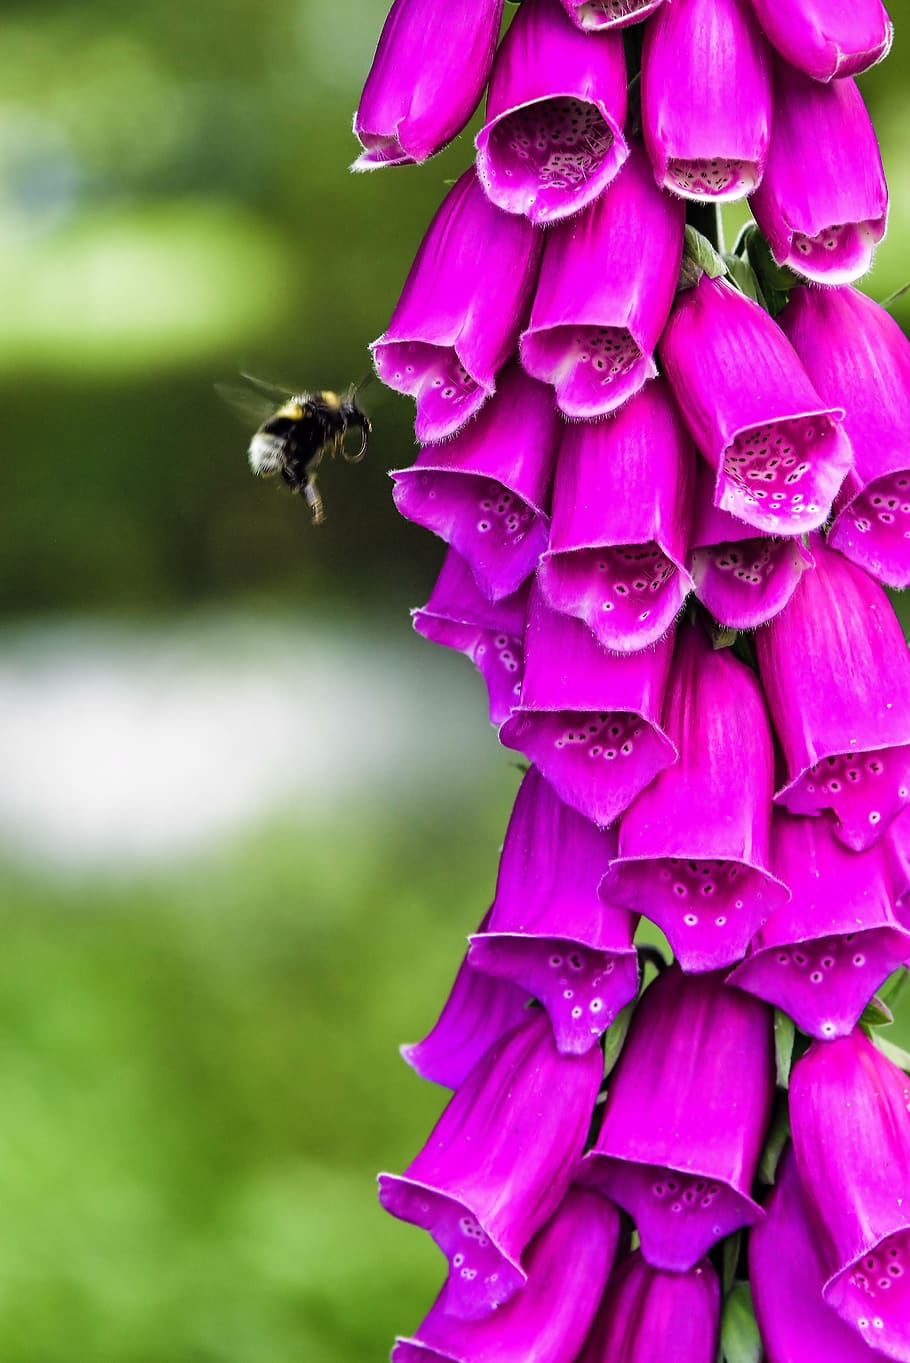 foxglove, bumble bee, summer, plant, flower, garden, purple, bee, insect, bumble